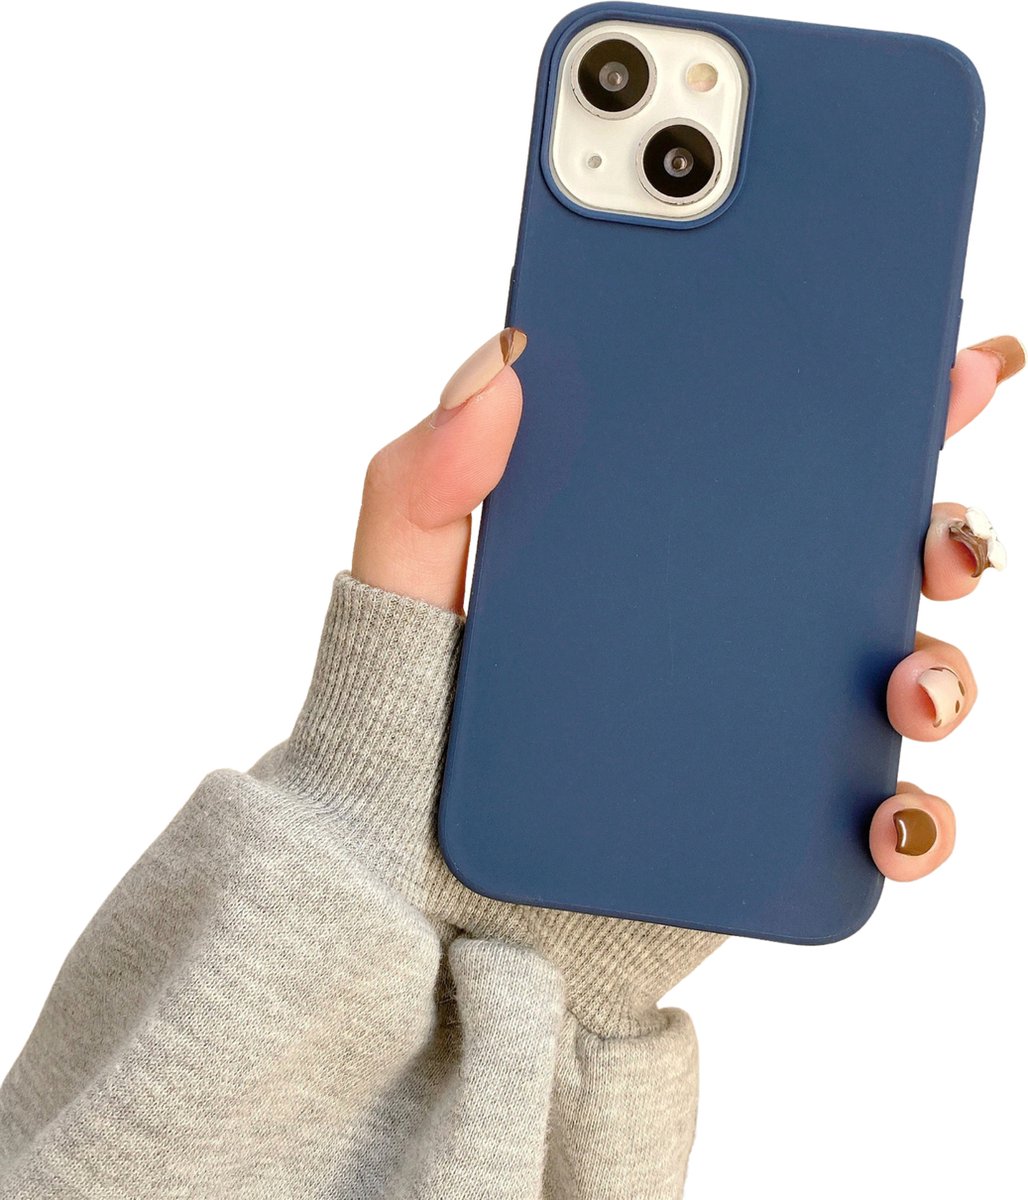 Apple iPhone 14 Soft Touch Hoesje - Navy Blauw - Stevig Shockproof TPU Materiaal - Zachte Coating - Siliconen Feel Case - Back Cover Donkerblauw